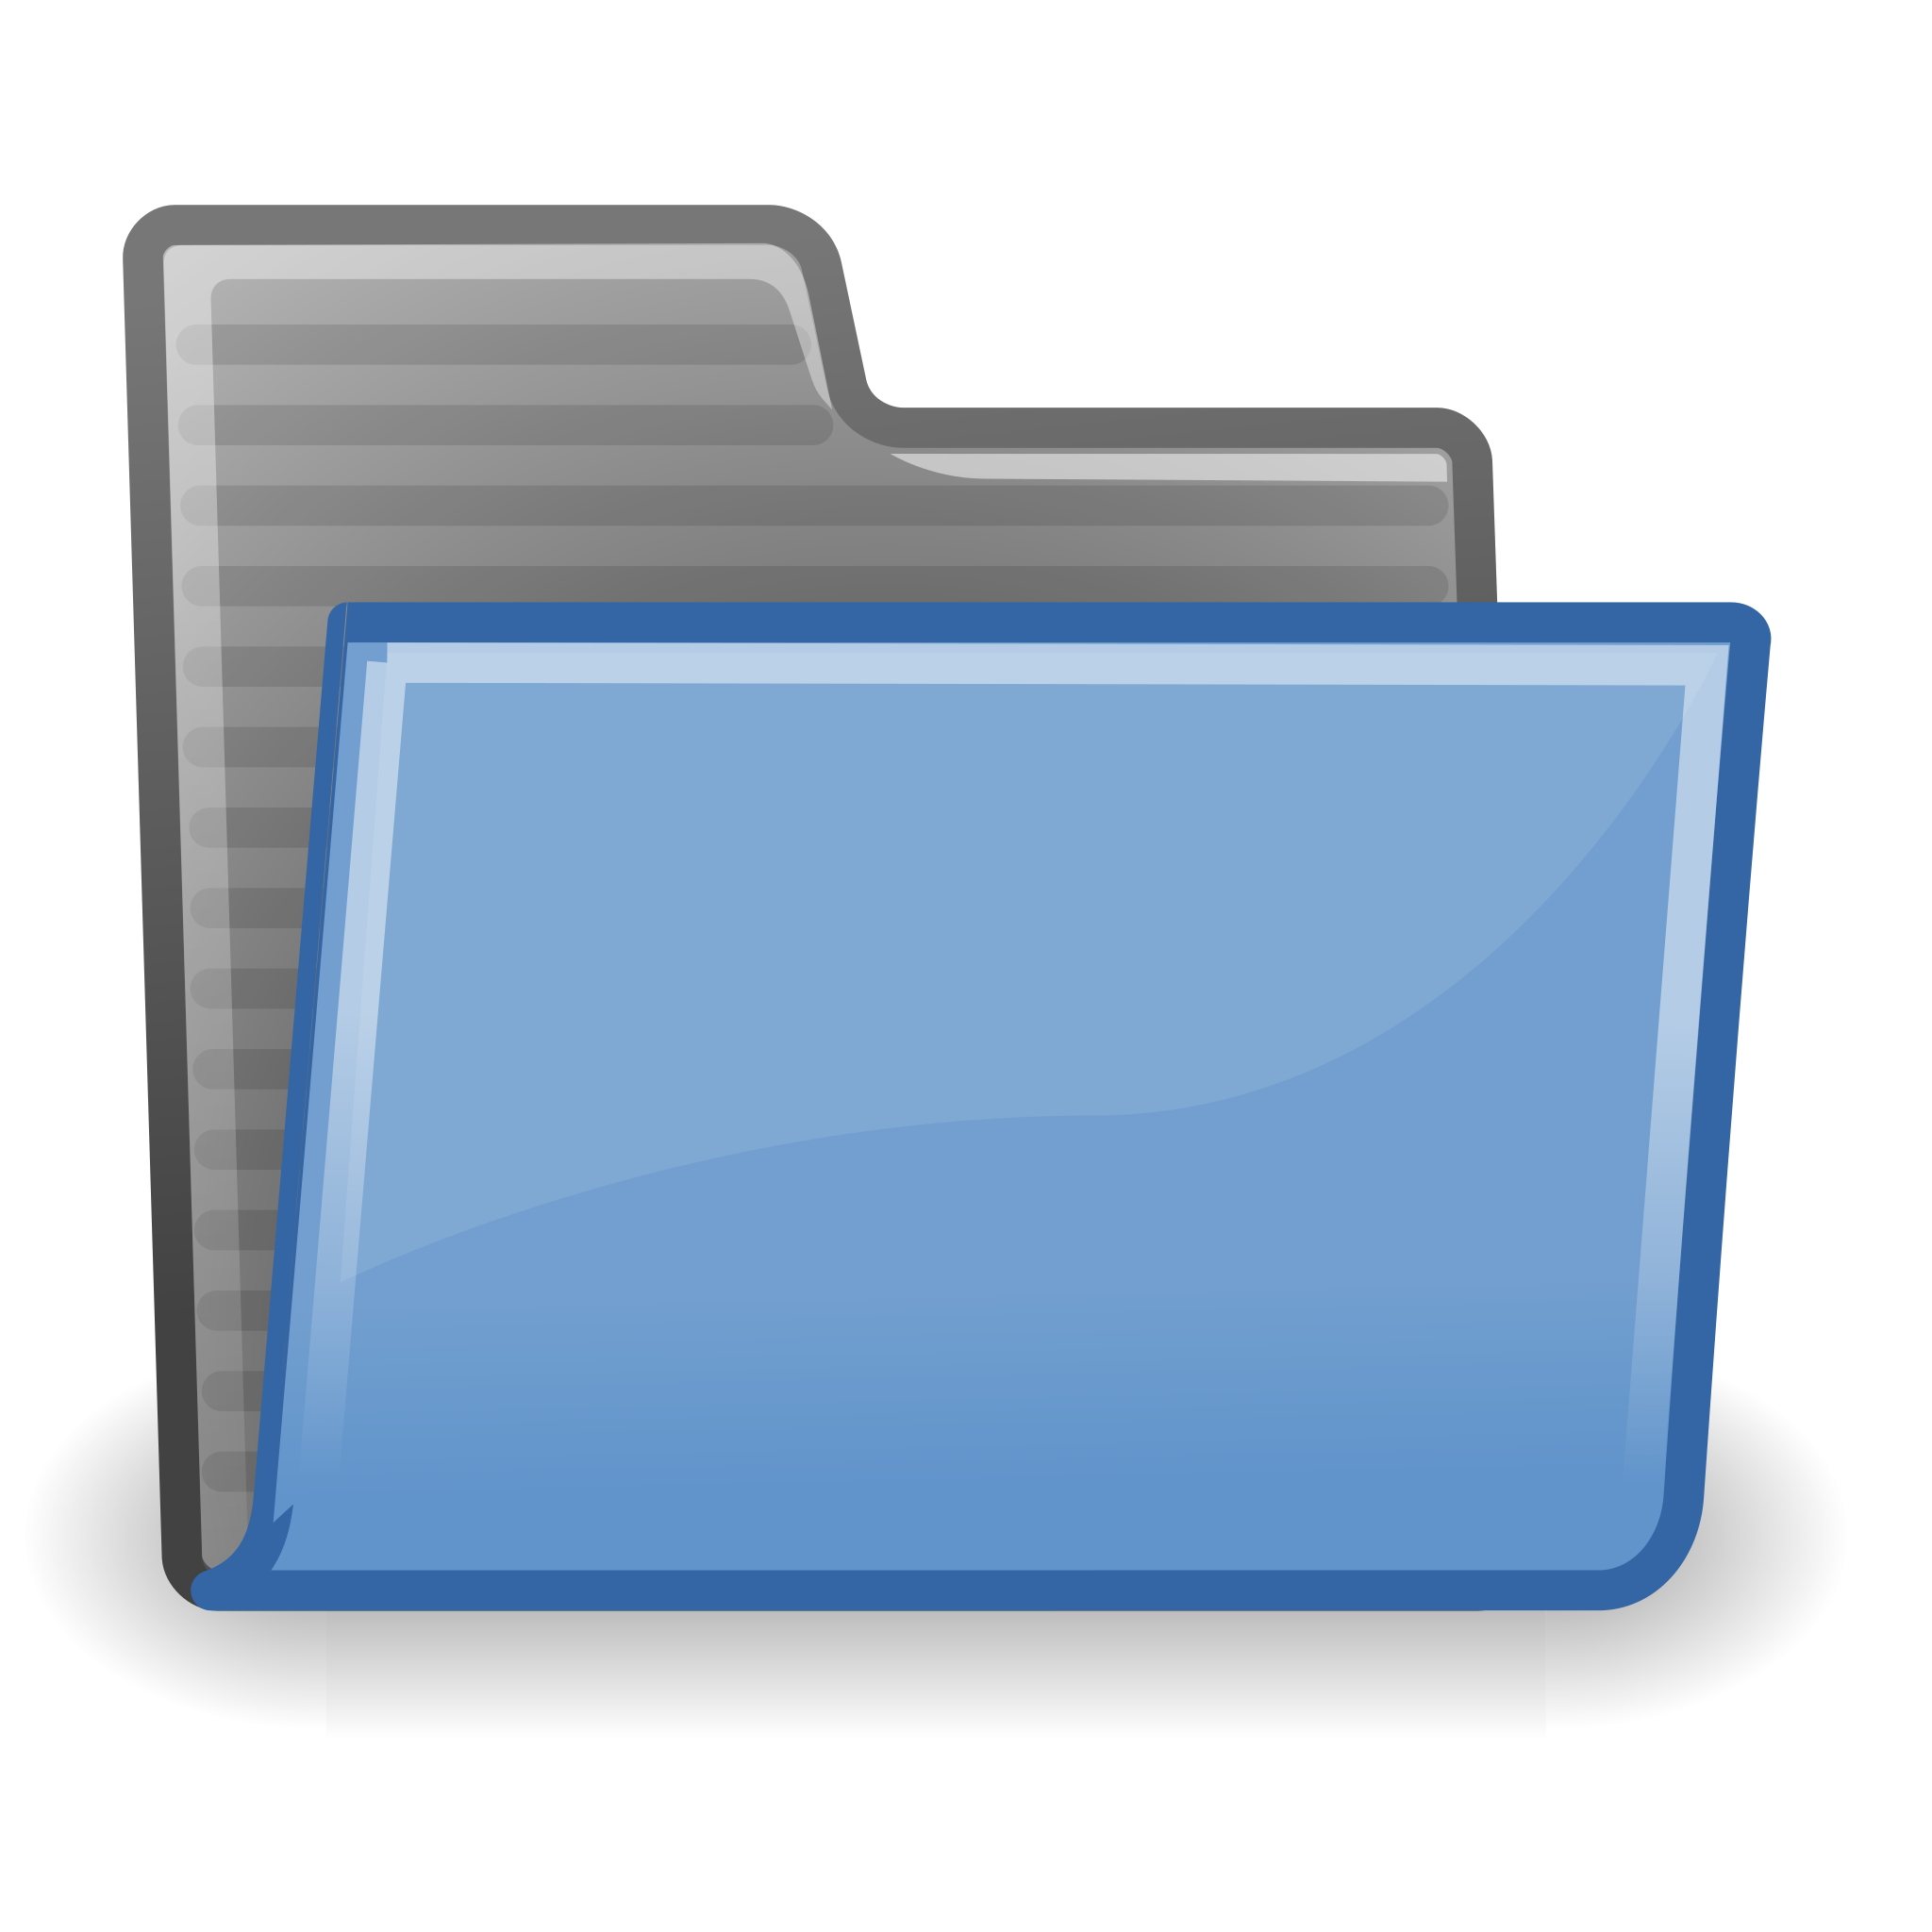 Folder icon with an arrow indicating options.